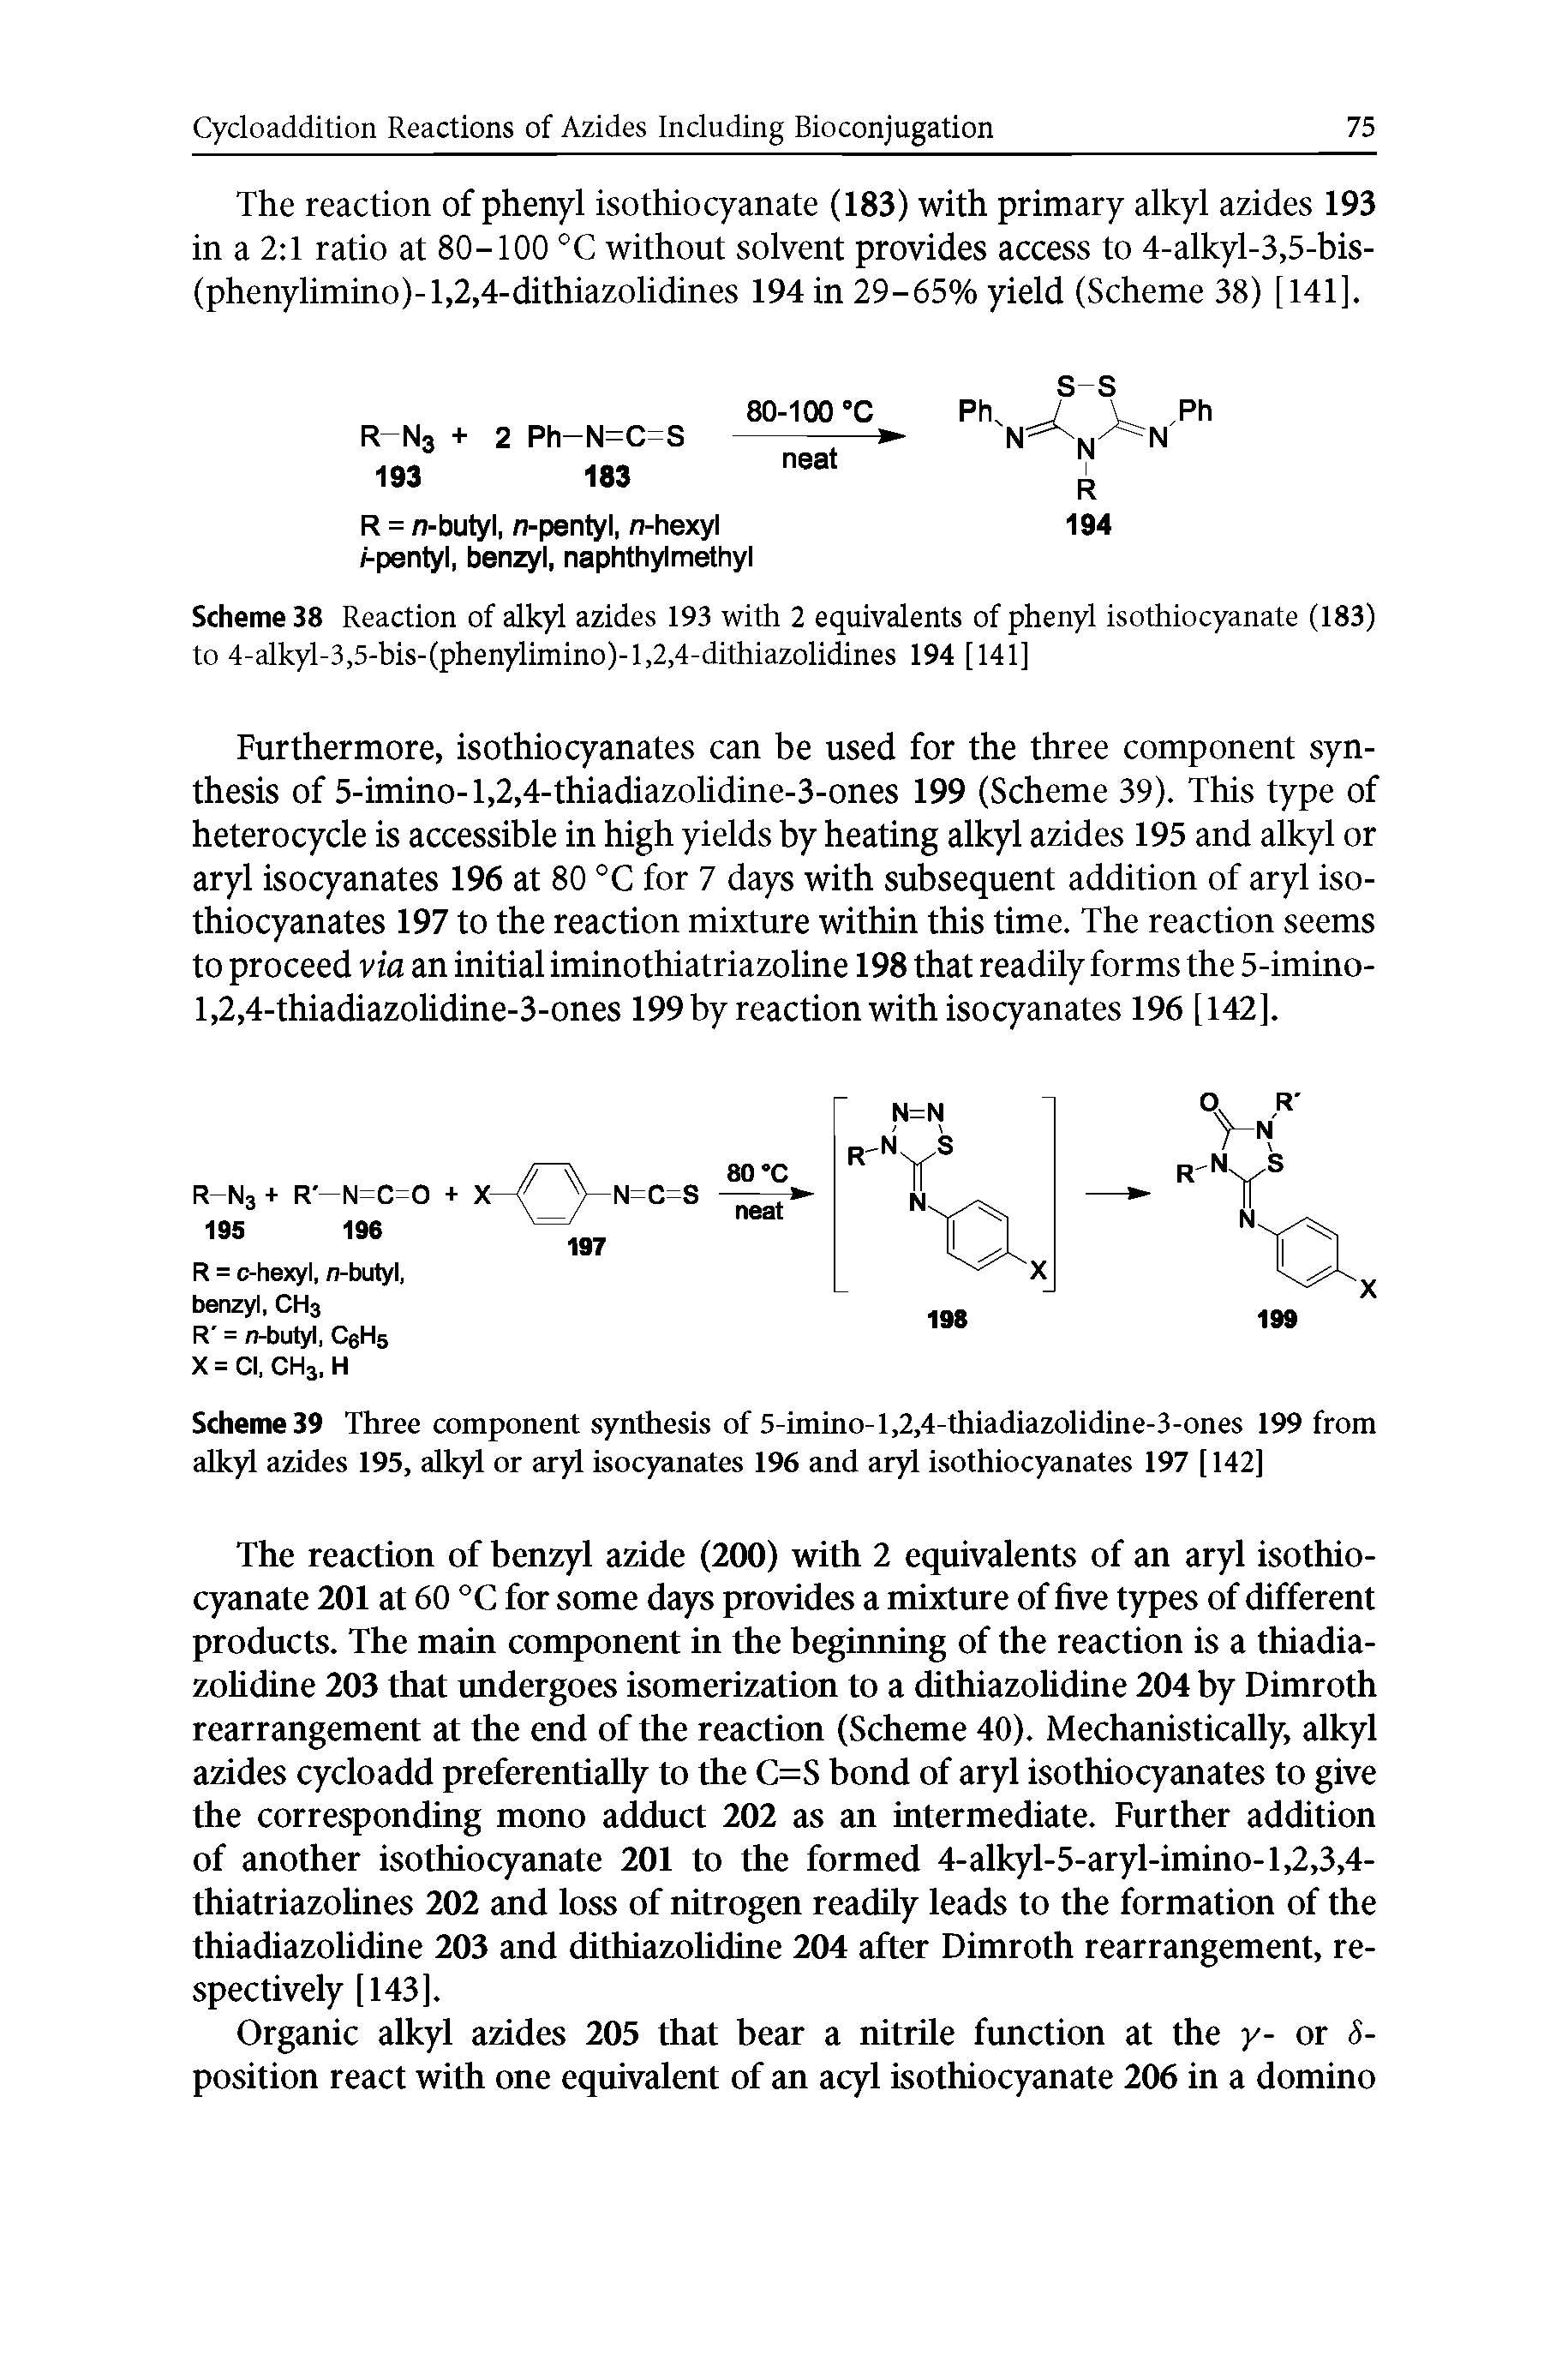 Scheme 39 Three component synthesis of 5-imino-l,2,4-thiadiazolidine-3-ones 199 from alkyl azides 195, allqd or ar)4 isocyanates 196 and ar)4 isothiocyanates 197 [ 142]...